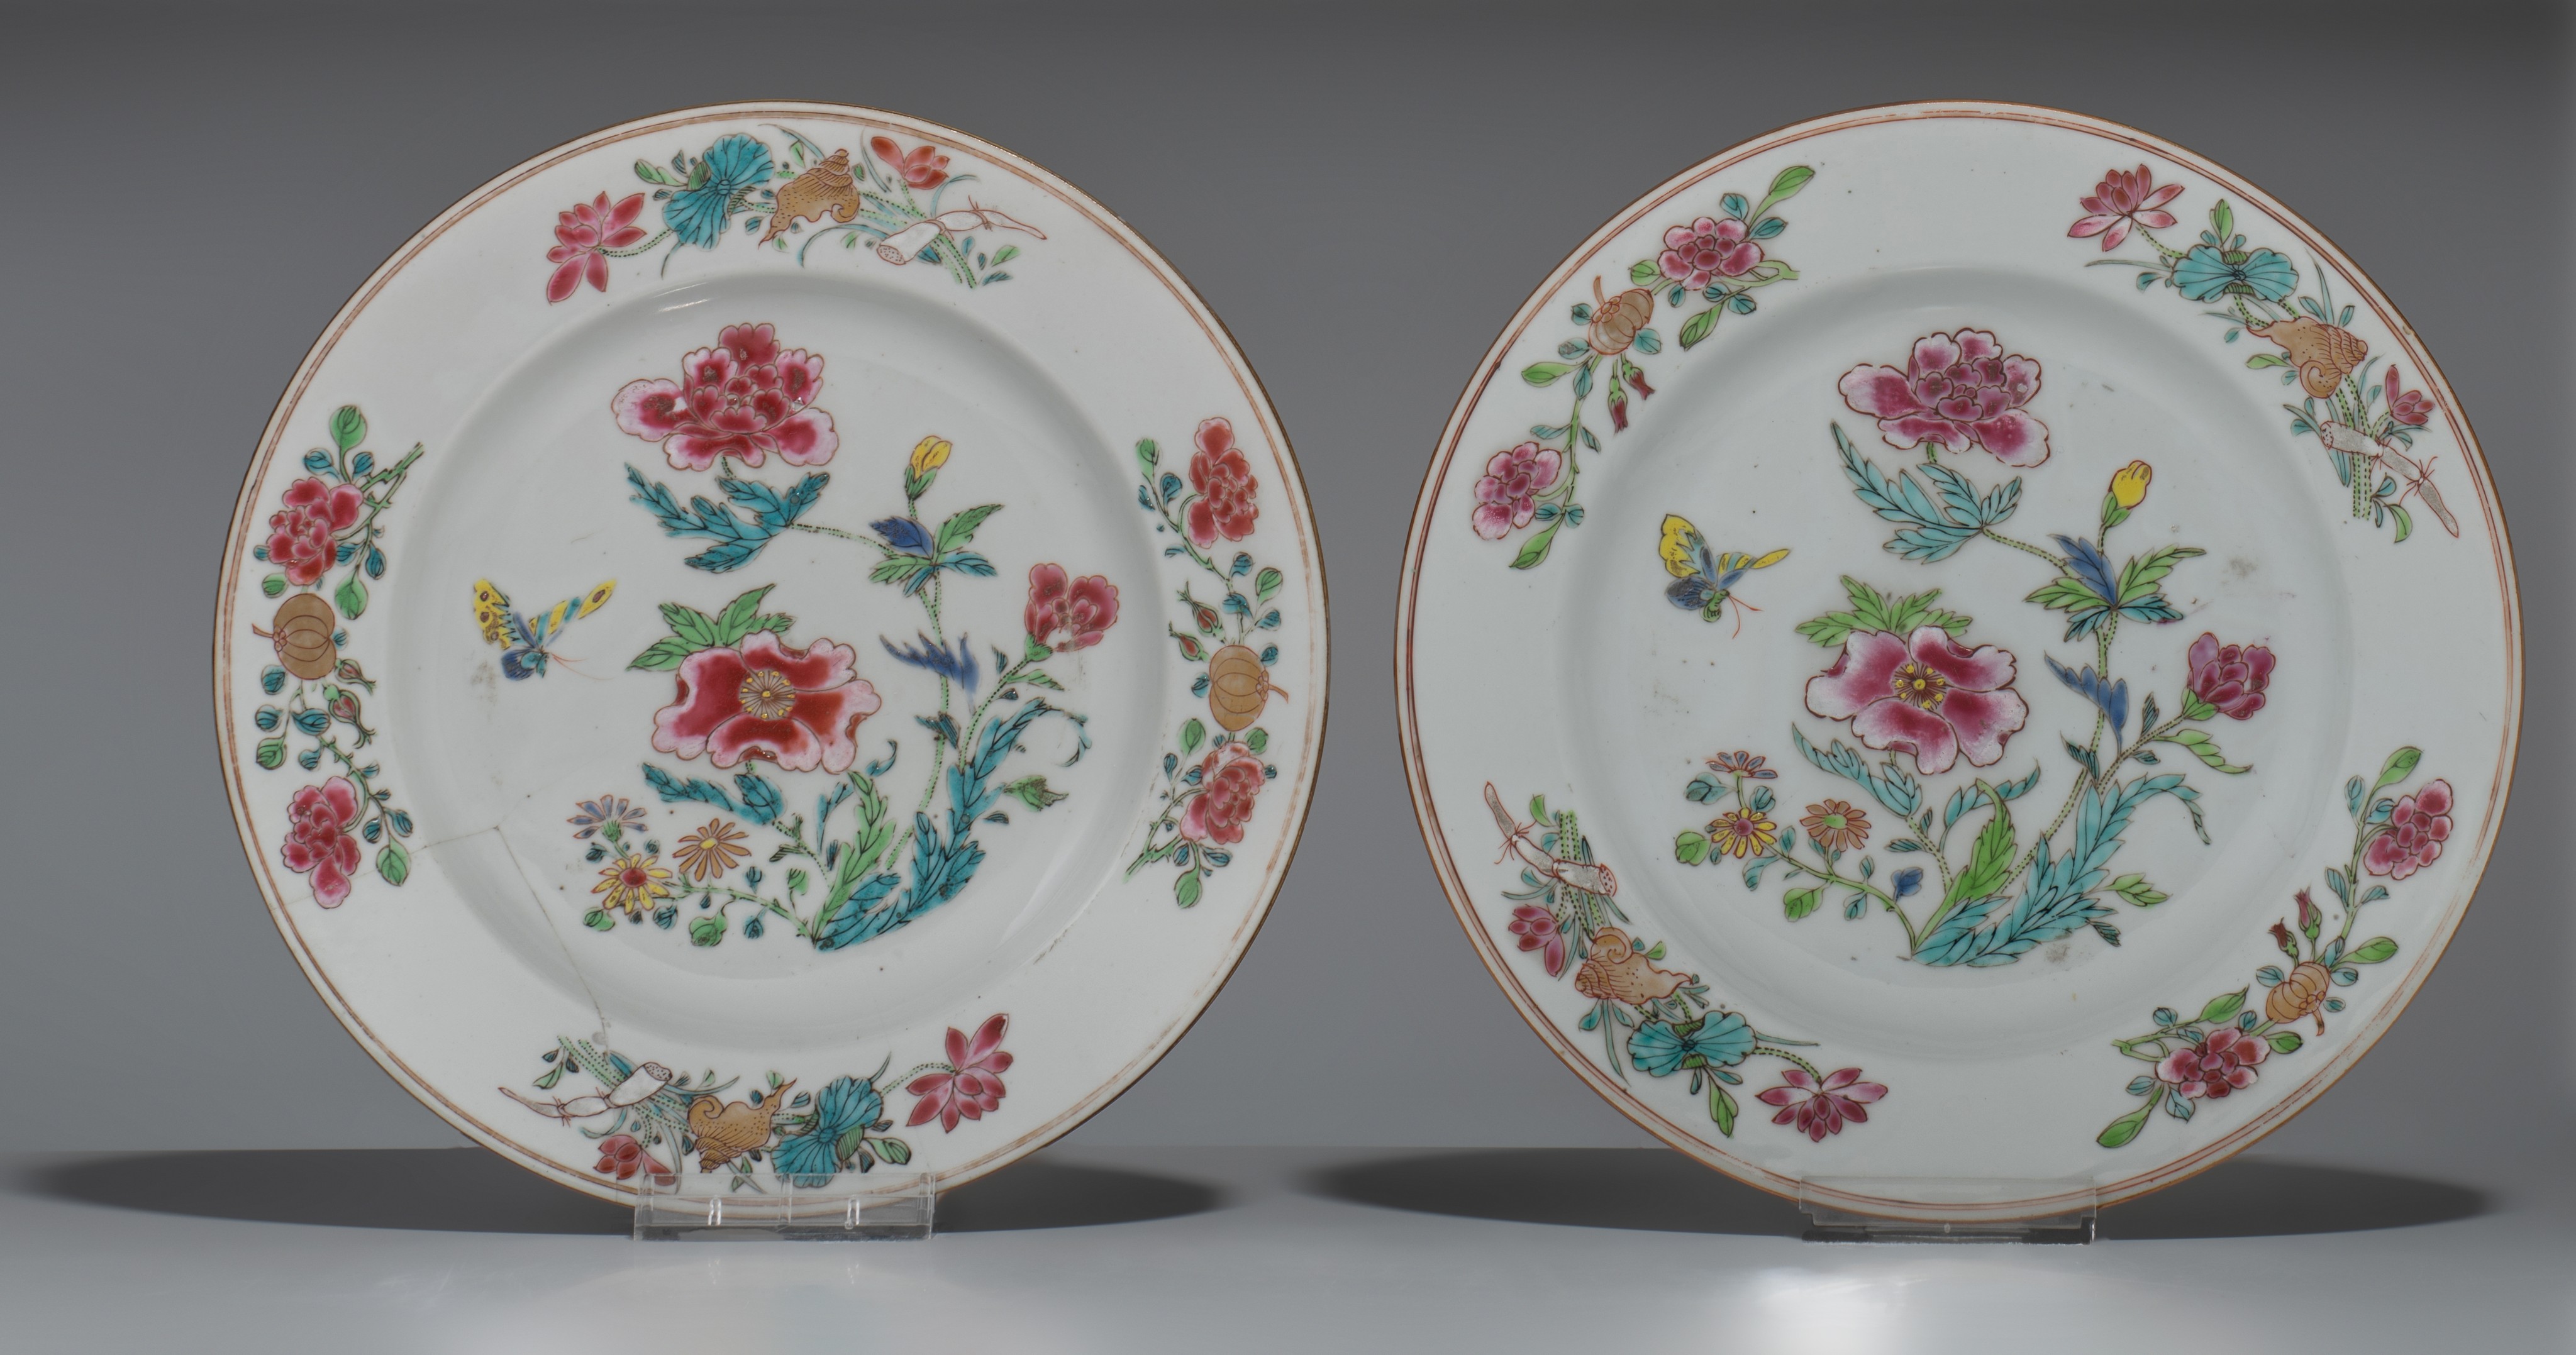 A collection of various Chinese export porcelain plates, Wanli, Qianlong and Guangxu period, ø 22 - - Image 8 of 11